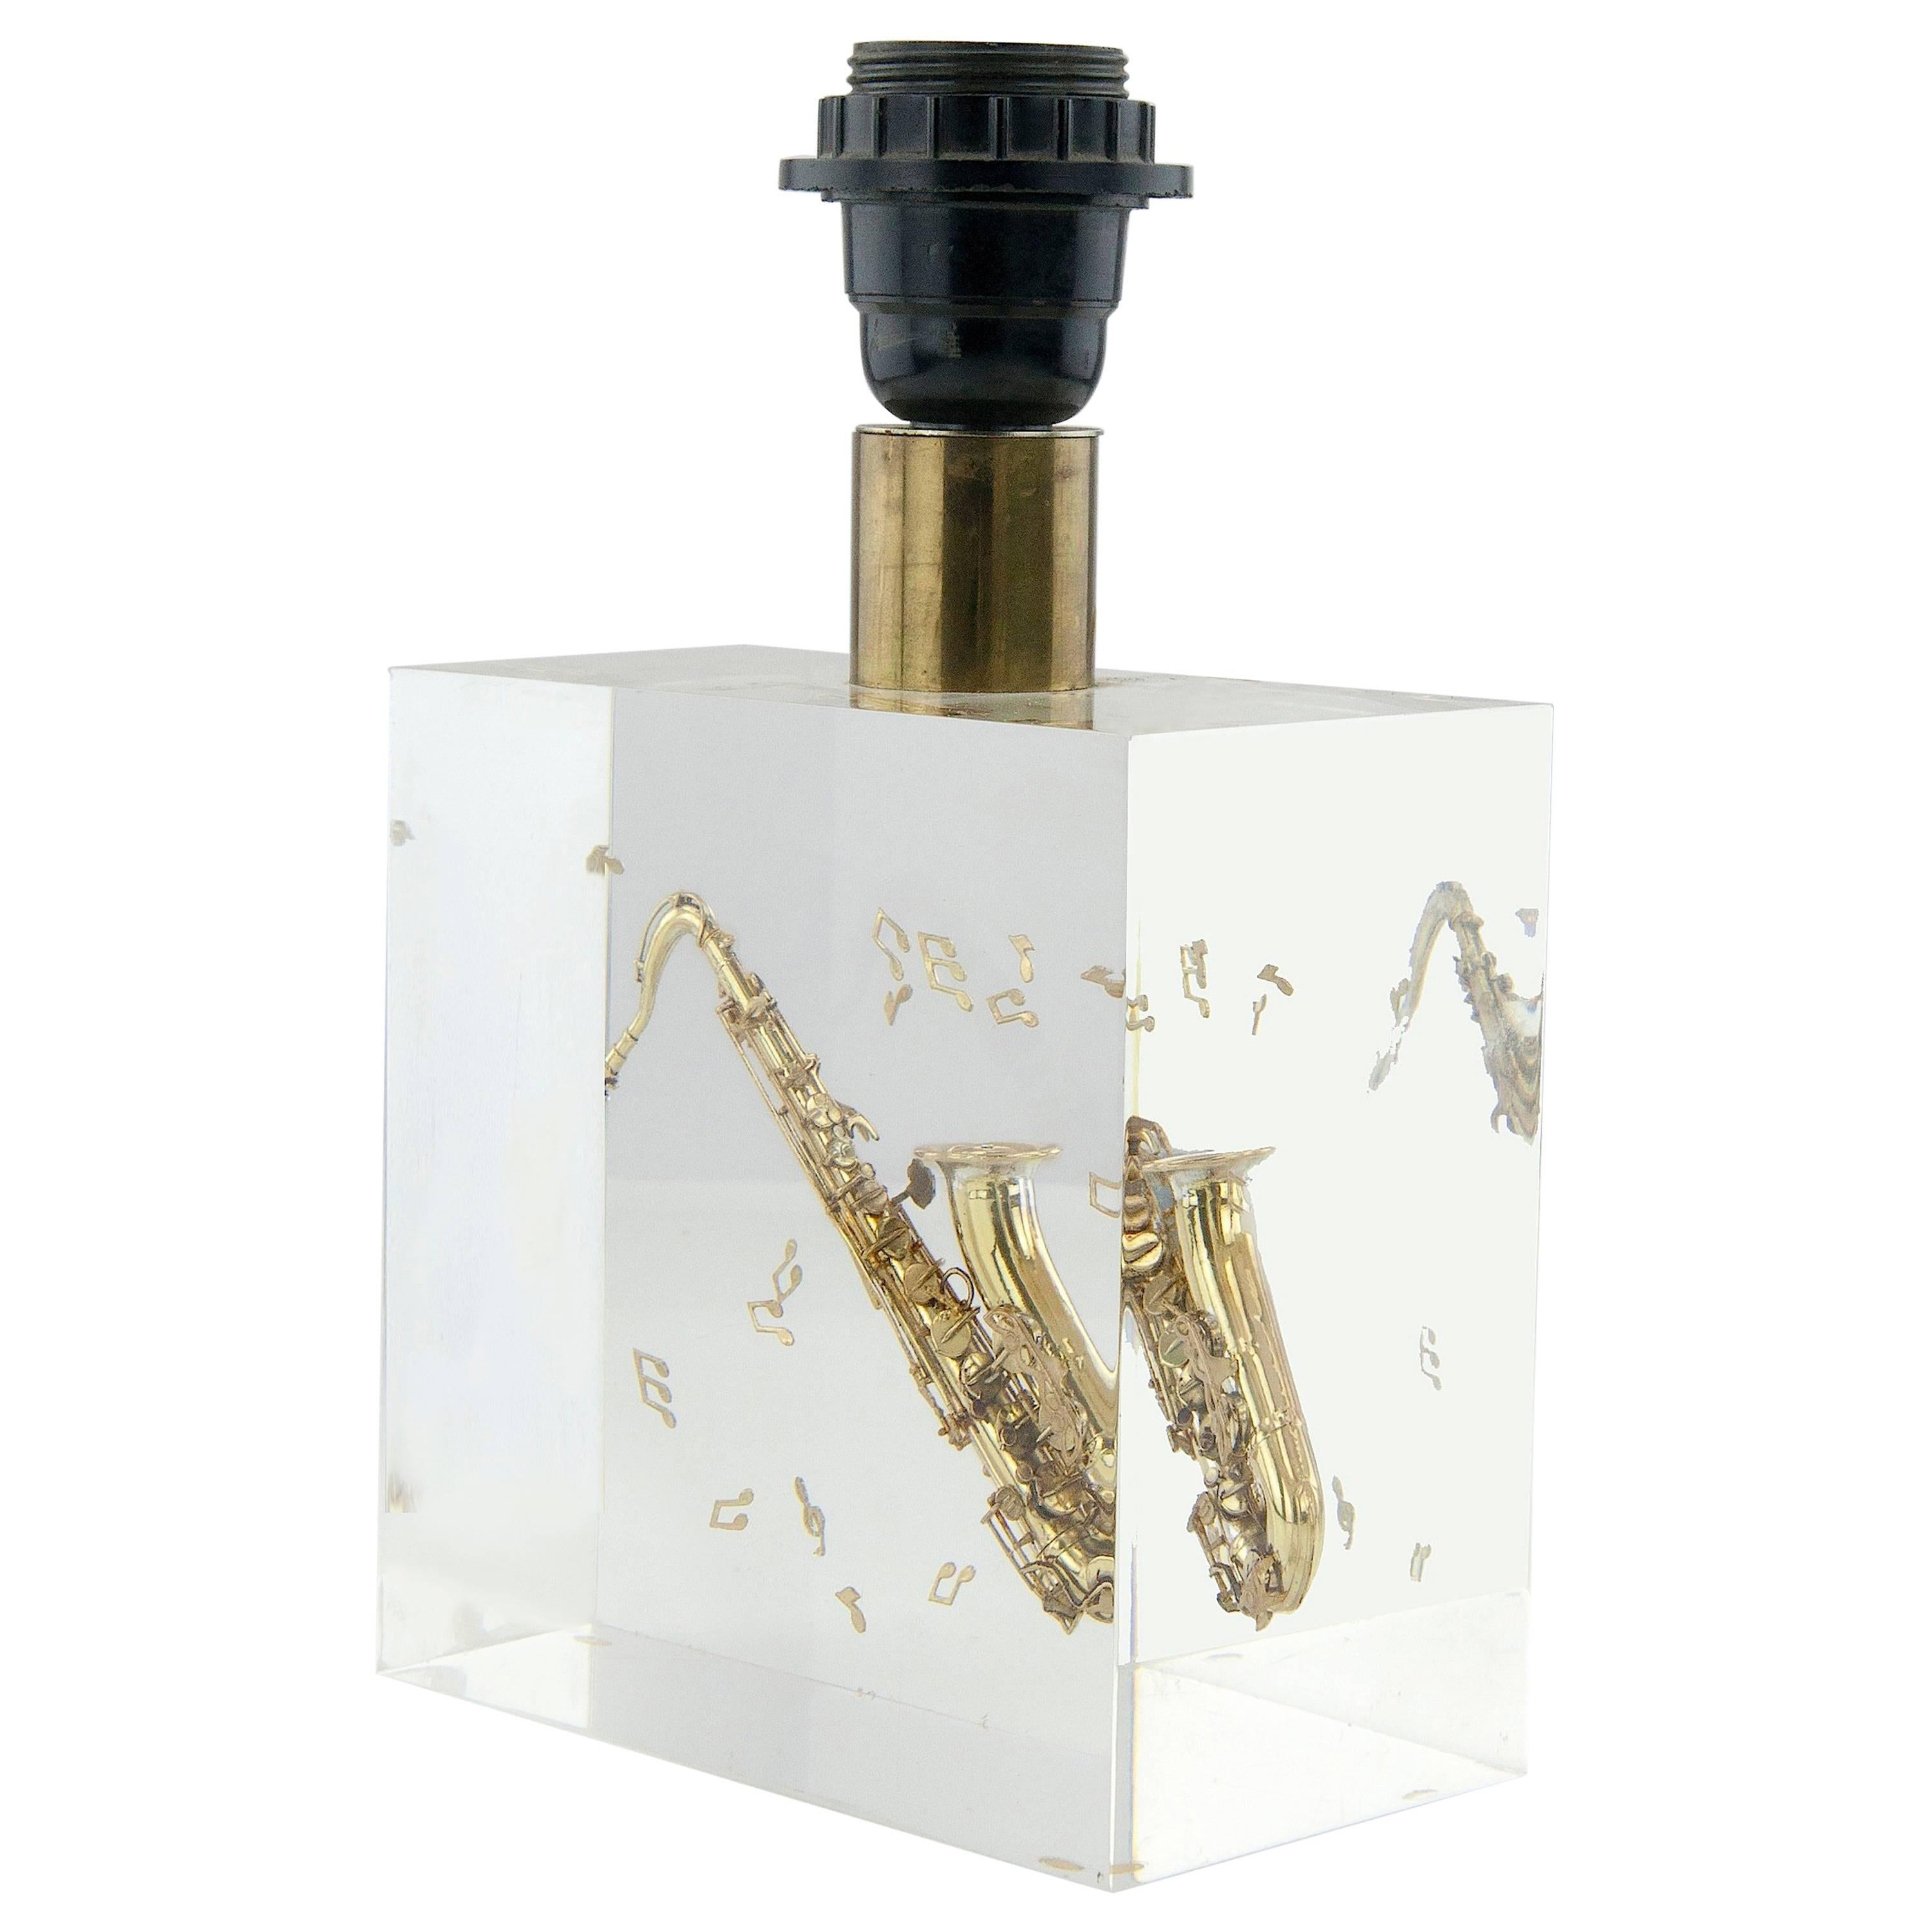 Resin Table Lamp with an Inclusion of a Saxophone